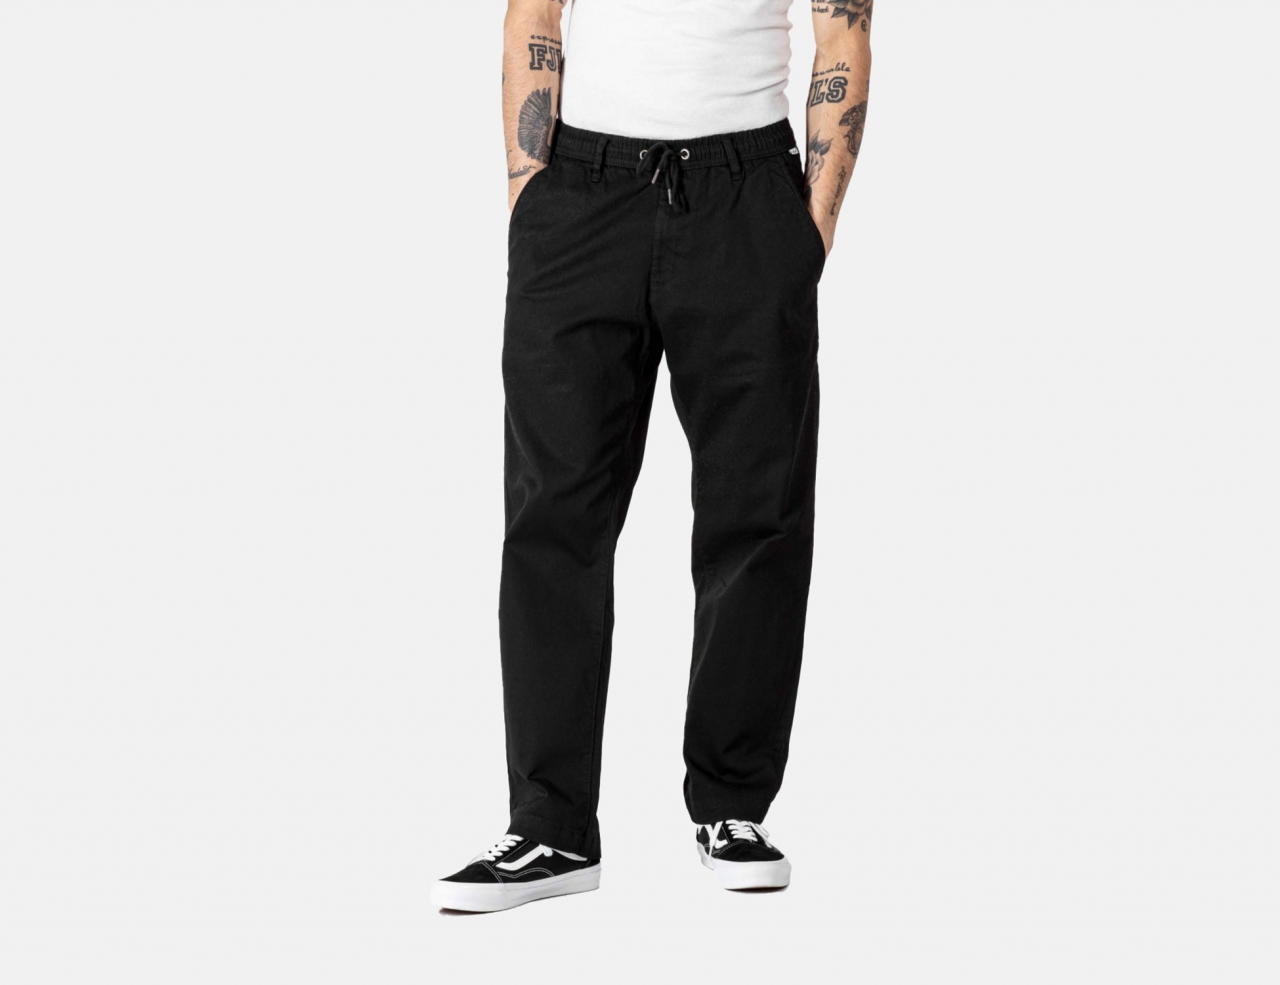 Reell Jeans Reflex Loose Chino Pant - Black